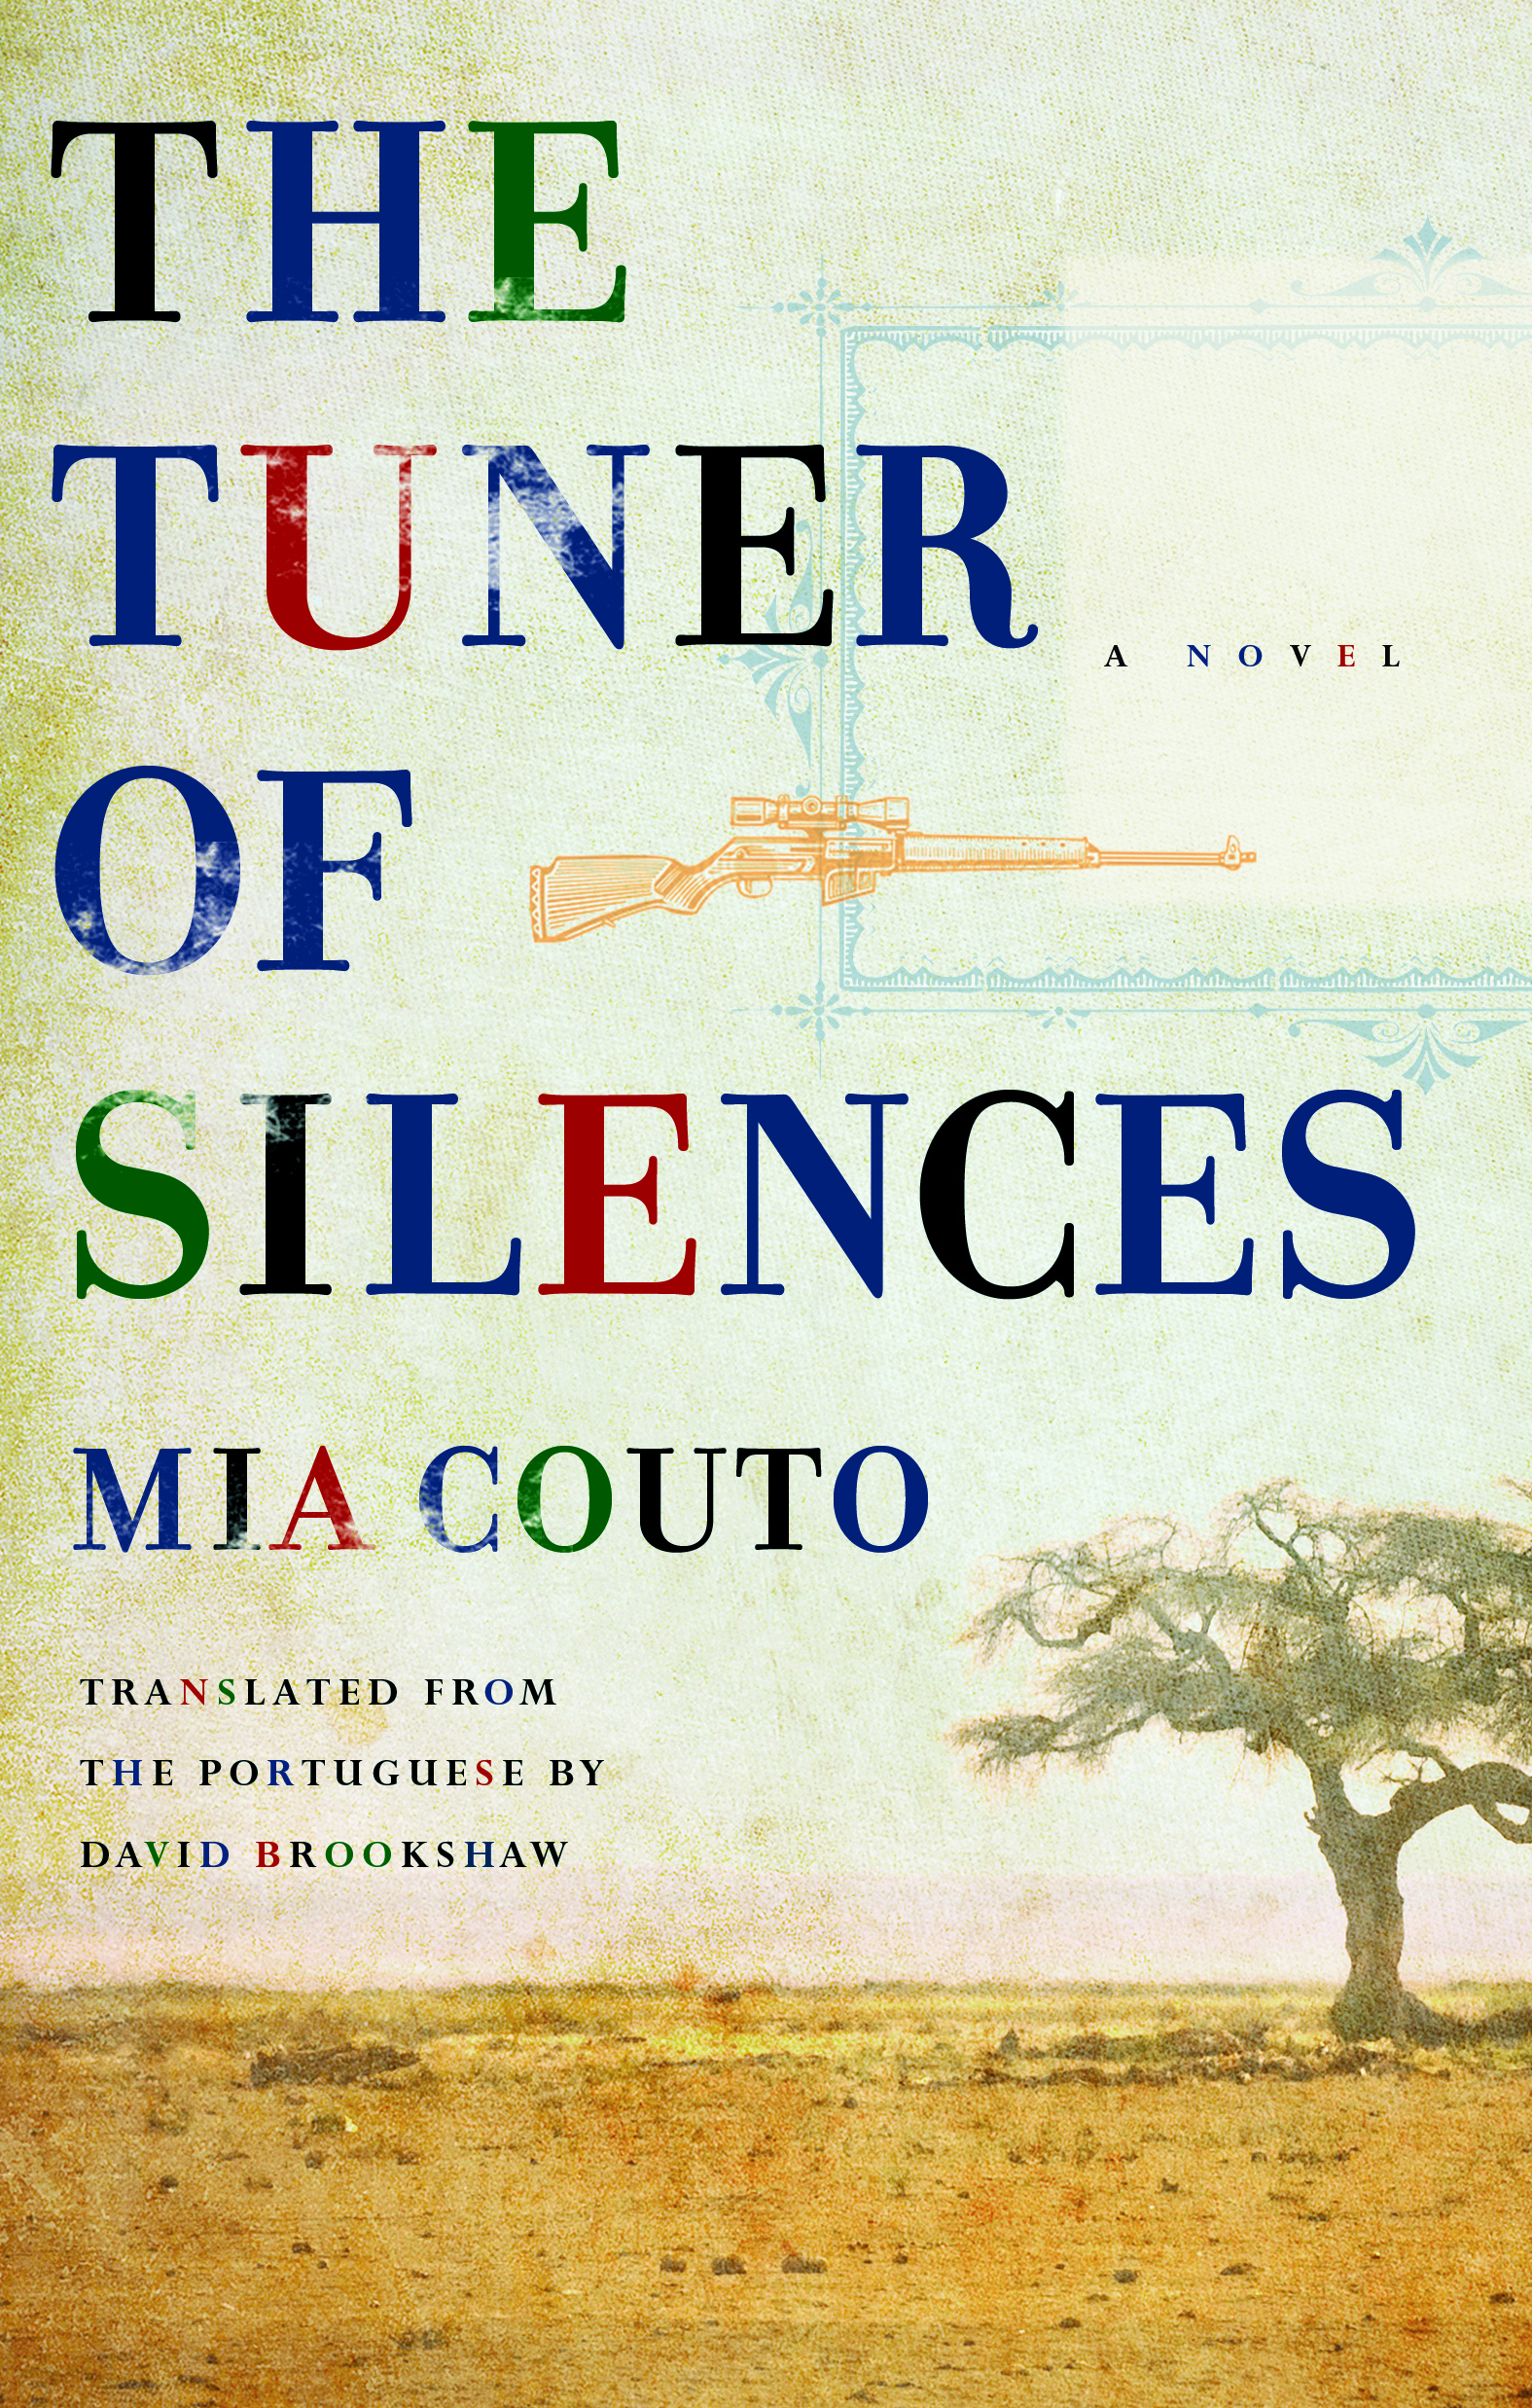 Mia Couto in Conversation with Anderson Tepper